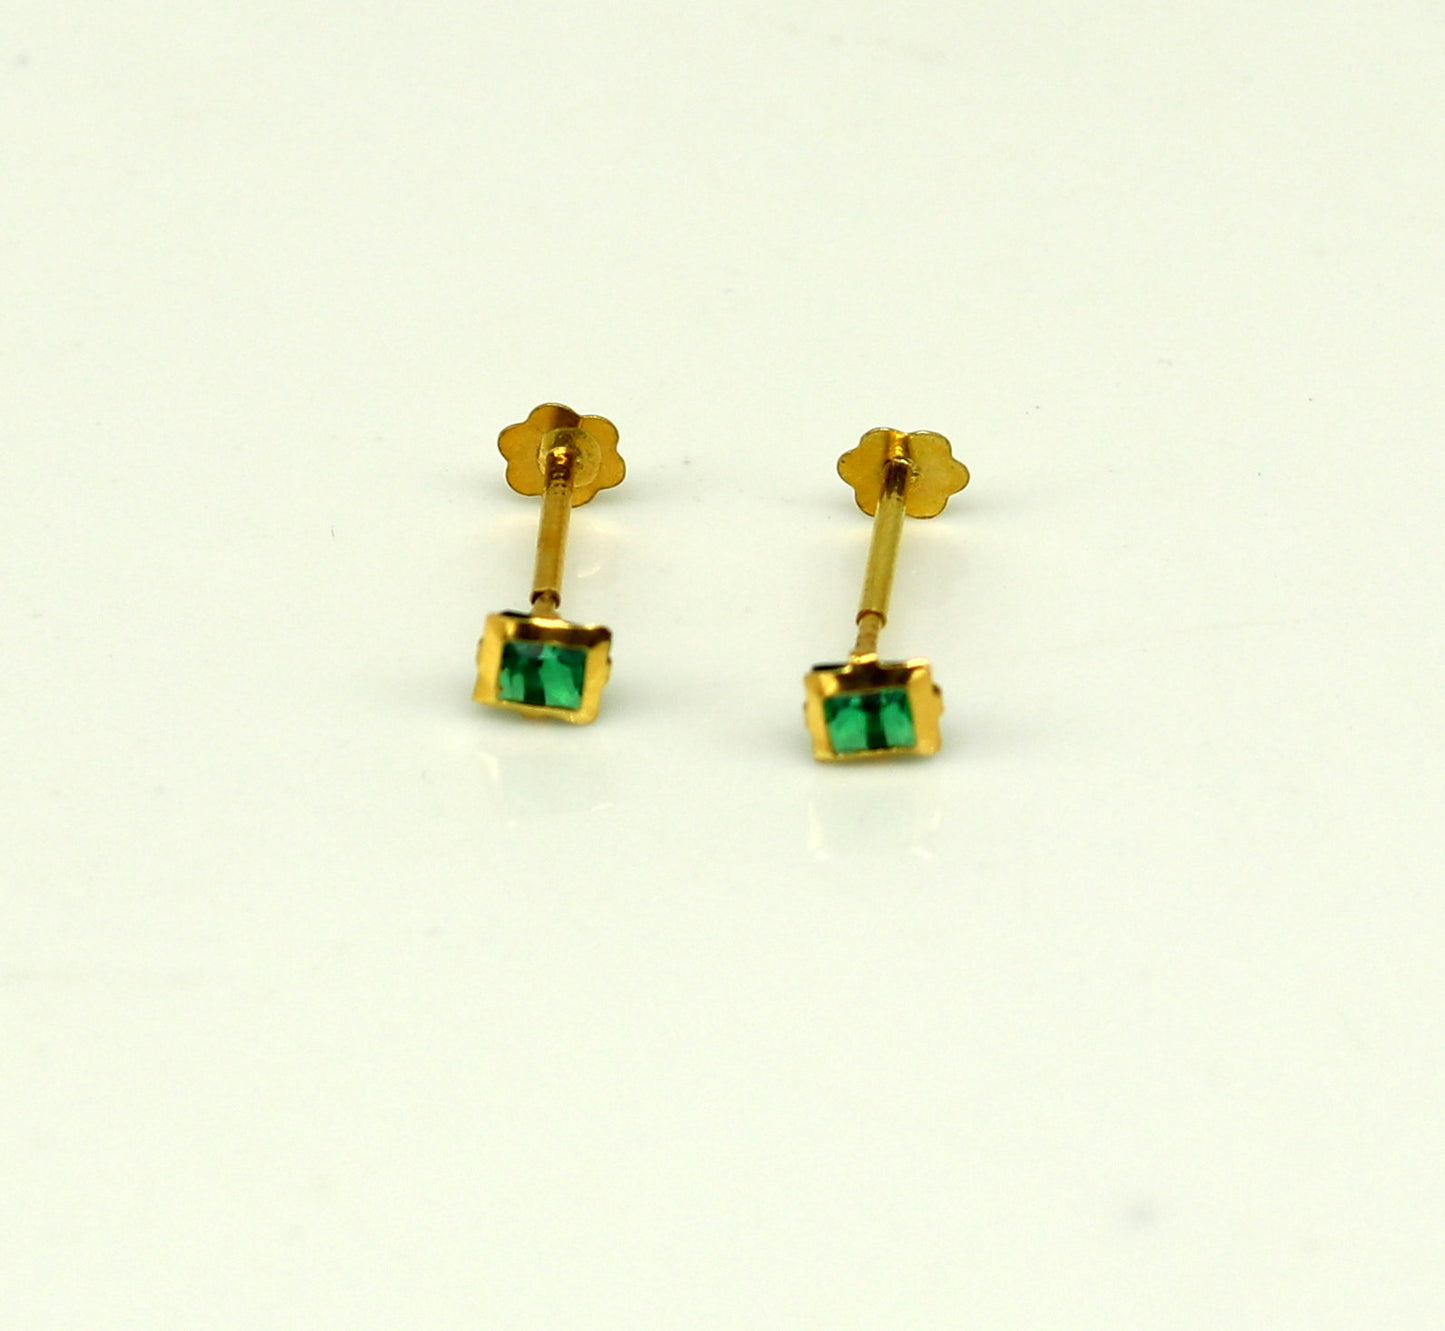 3.5mm tiny single Green stone handmade 18kt yellow gold combo jewelry we can use as stud or nose stud , baby stud cartilage jewelry er110 - TRIBAL ORNAMENTS